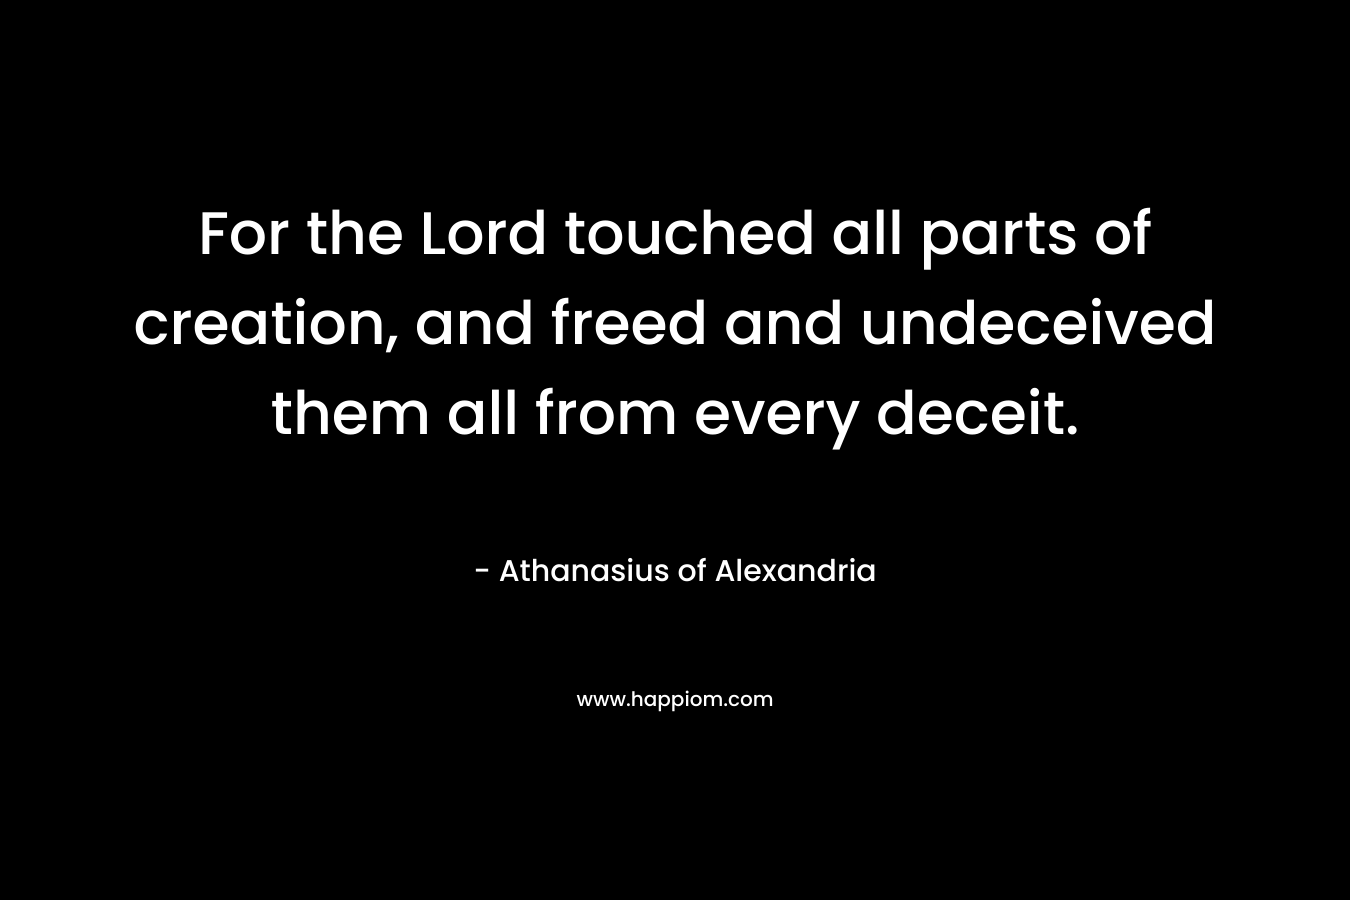 For the Lord touched all parts of creation, and freed and undeceived them all from every deceit.